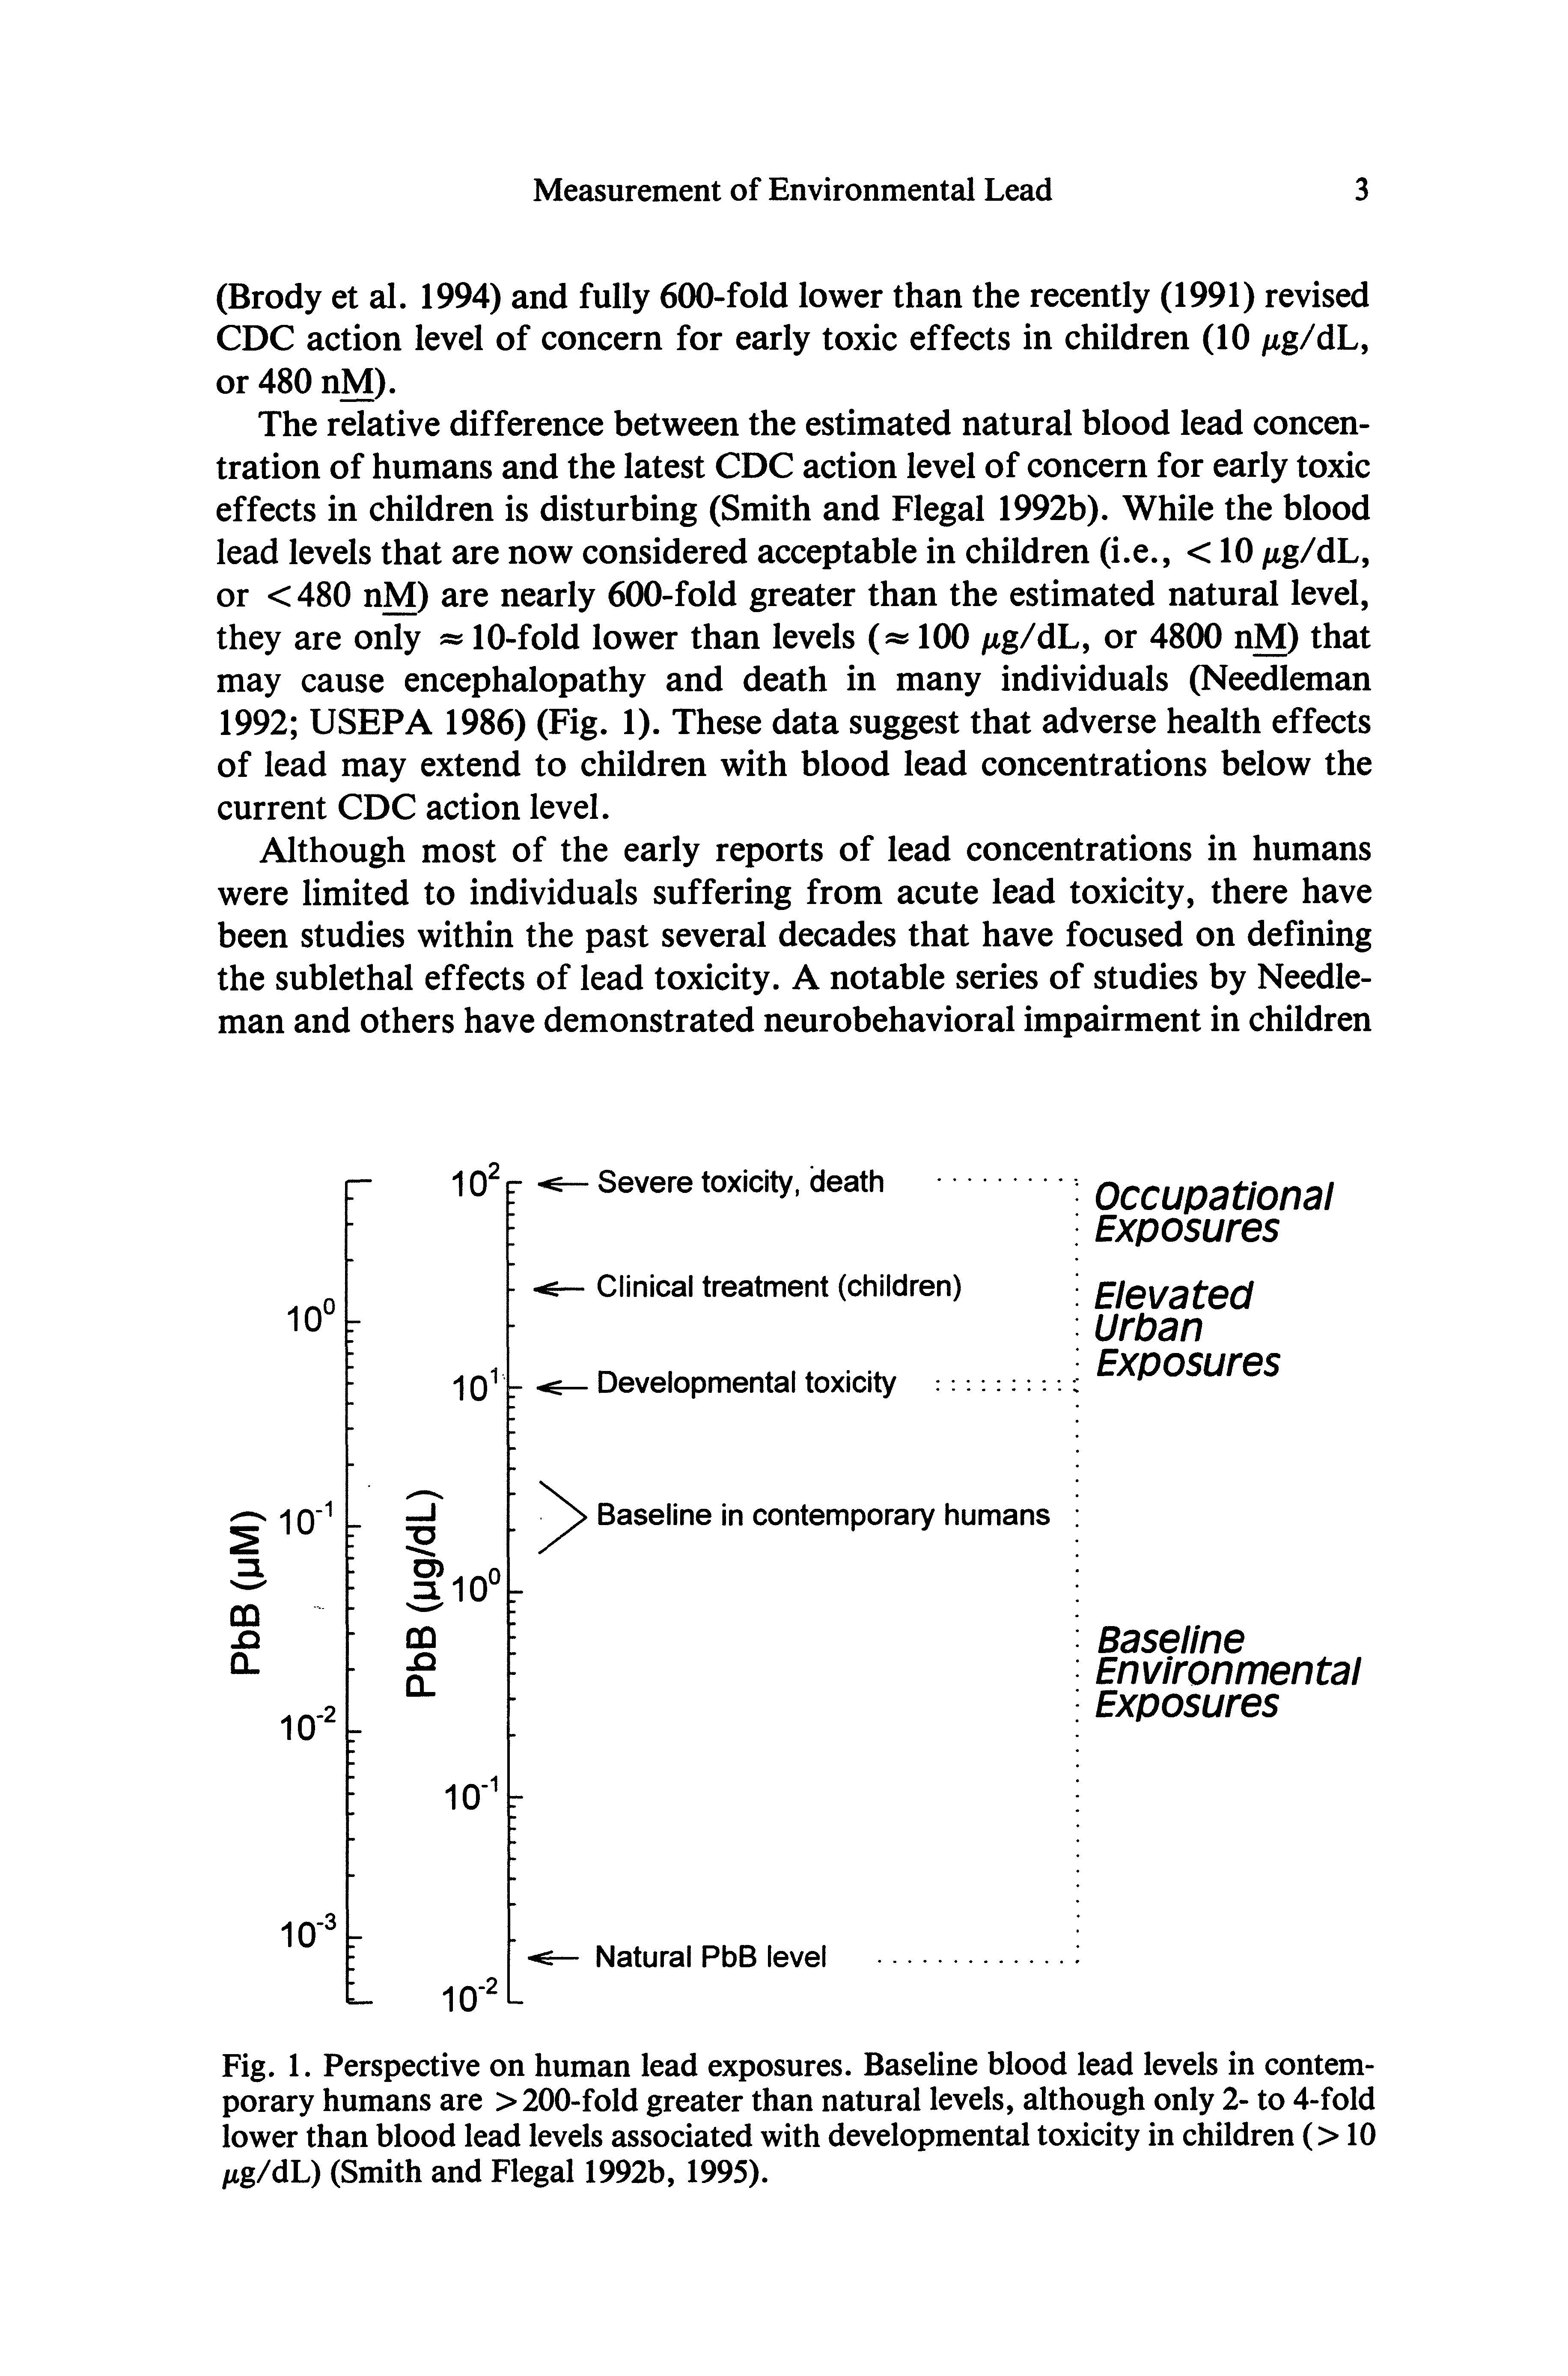 Fig. 1. Perspective on human lead exposures. Baseline blood lead levels in contemporary humans are > 200-fold greater than natural levels, although only 2- to 4-fold lower than blood lead levels associated with developmental toxicity in children (> 10 lig/dL) (Smith and Flegal 1992b, 1995).